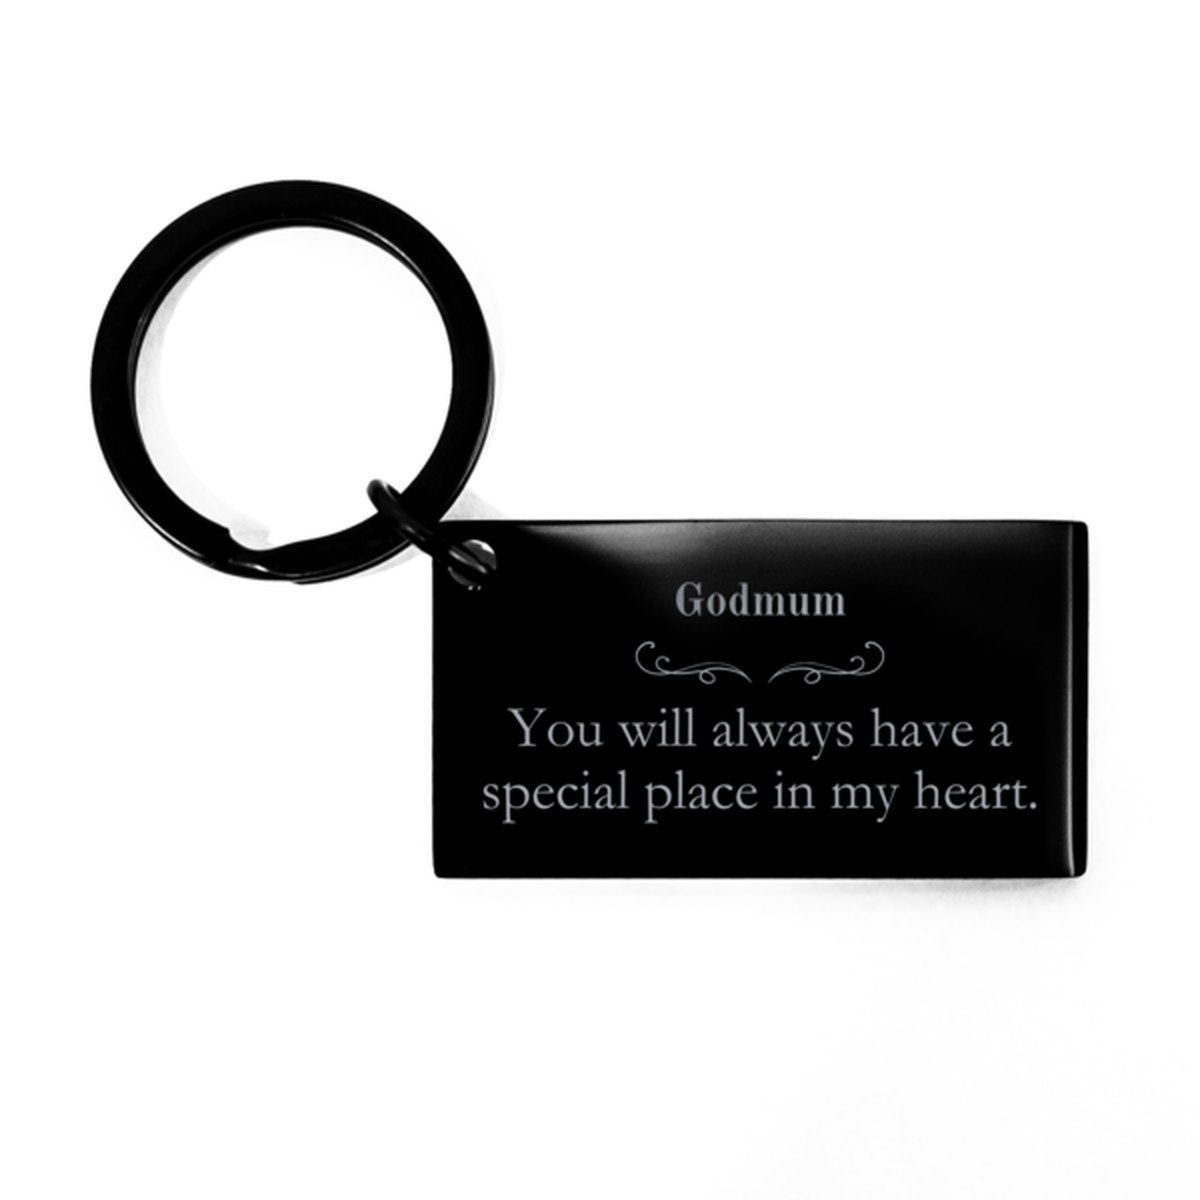 Godmum Keychain Engraved You will always have a special place in my heart, perfect gift for Mothers Day, Birthday, Christmas, and more - Inspirational Keychain for a wonderful Godmum